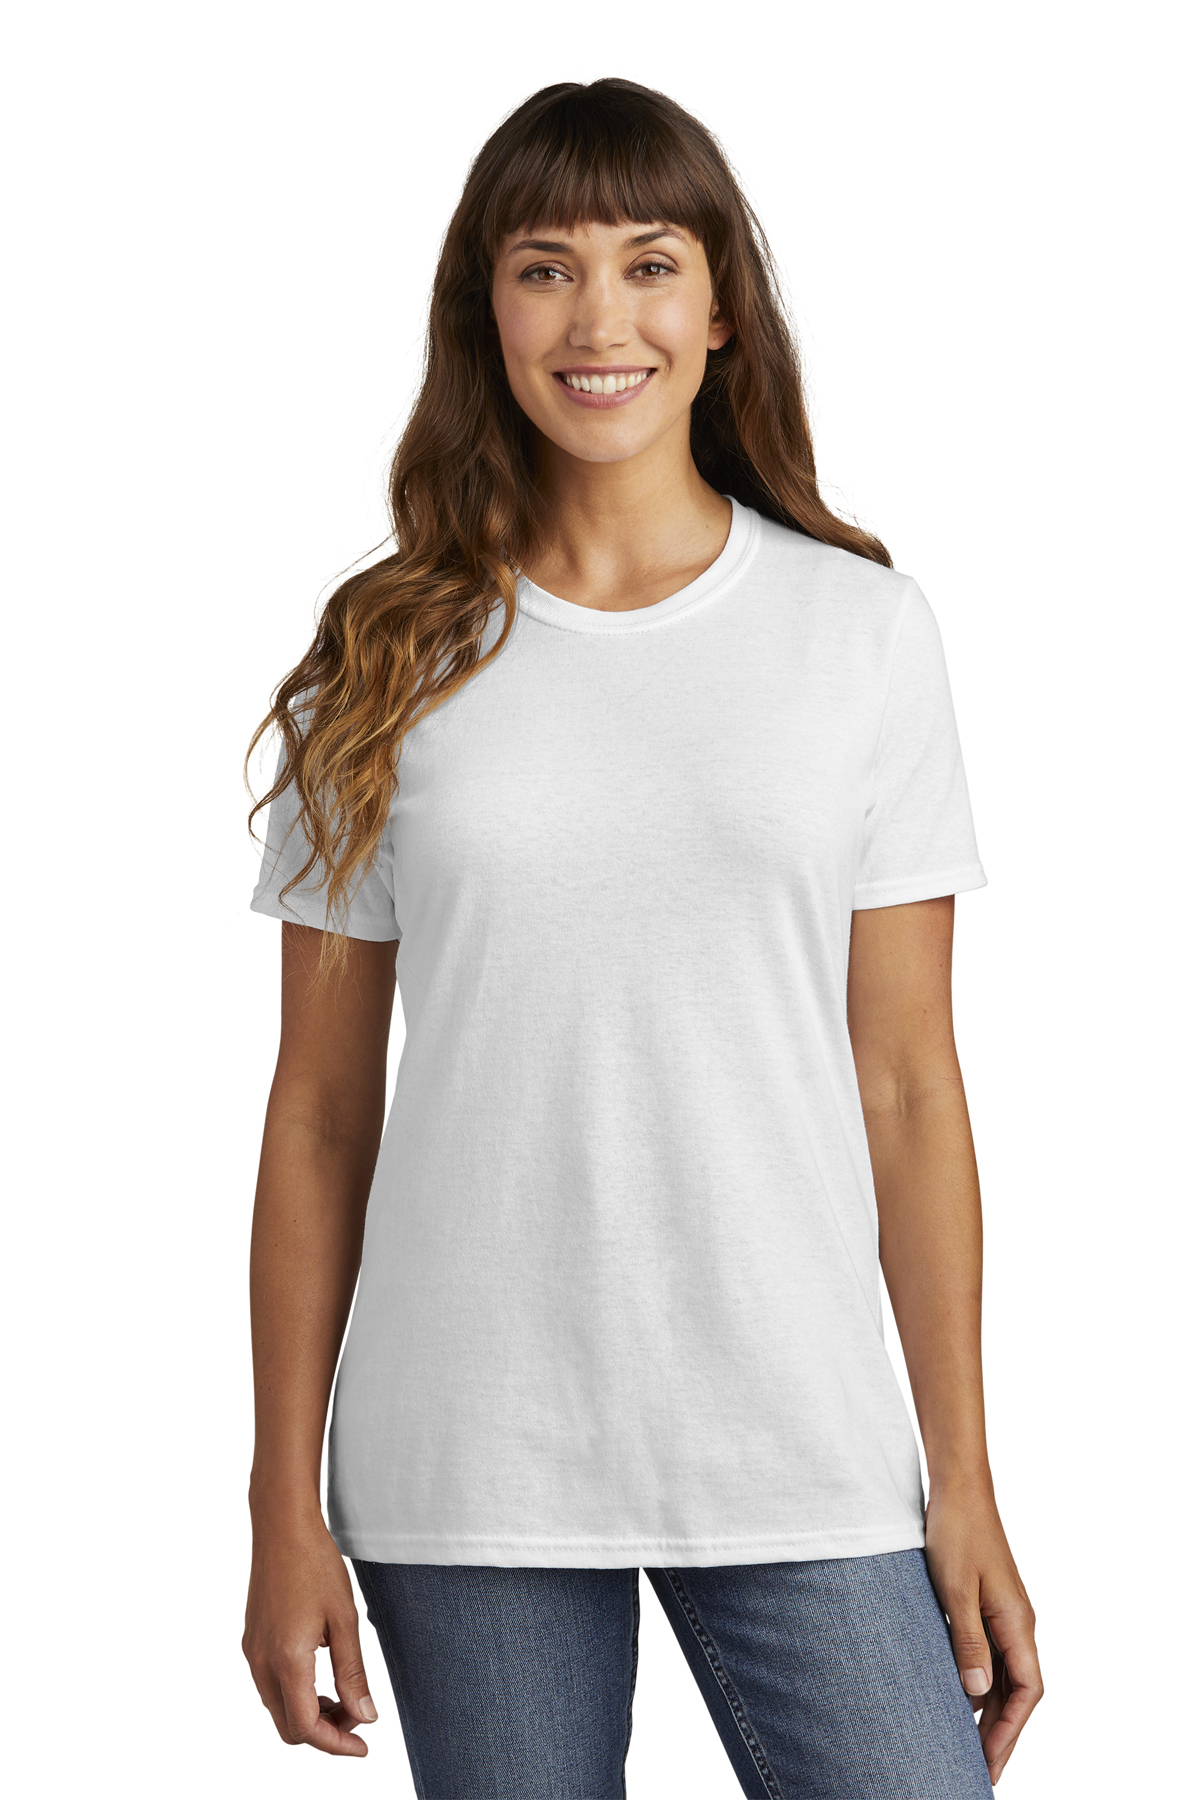 White T Shirt Silhouette Transparent Background, Specification